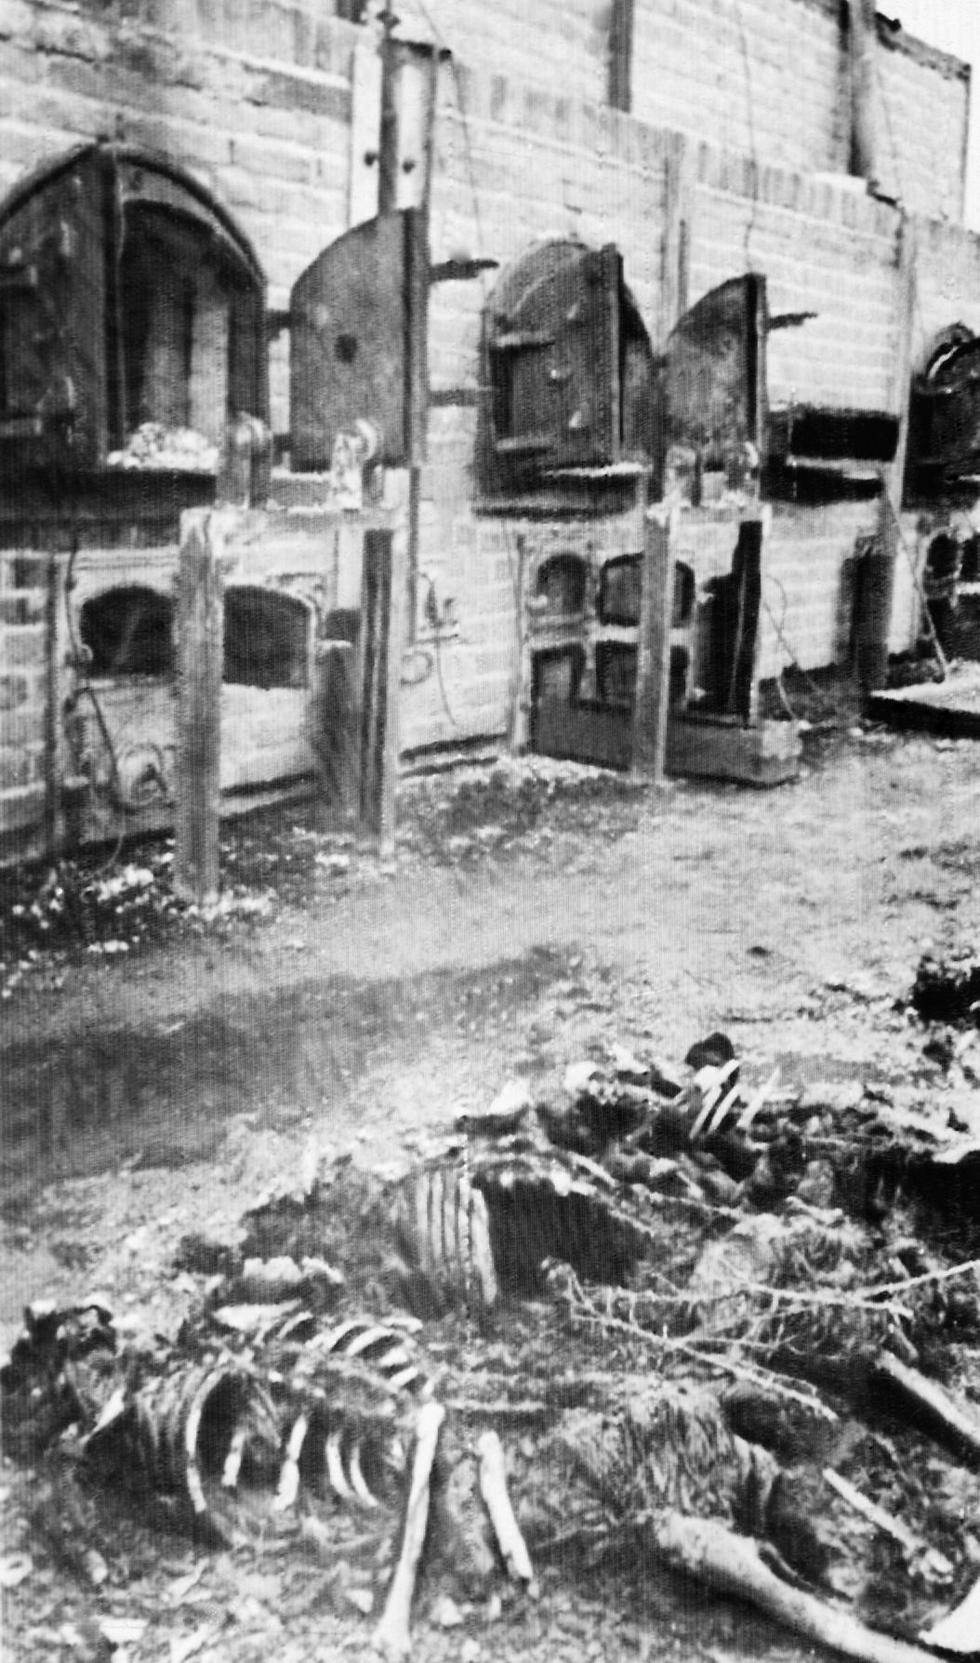 In thisֲ photo provided by the Soviet photo agency Sovfoto, skeletonsֲ of people tortured to death and burnedֲ lie near ovens of theֲ crematorium operated by the Nazis in Lublin, Poland, on Aug. 14, 1944. The direct and indirect extermination at the Lublin Majdanek concentration camp resulted in the deaths of nearly 80,000 people, approximately 60,000 of whom were Jews, as well as Poles, Russians and Ukrainians (Photo: Sovfoto) (Photo: AP)